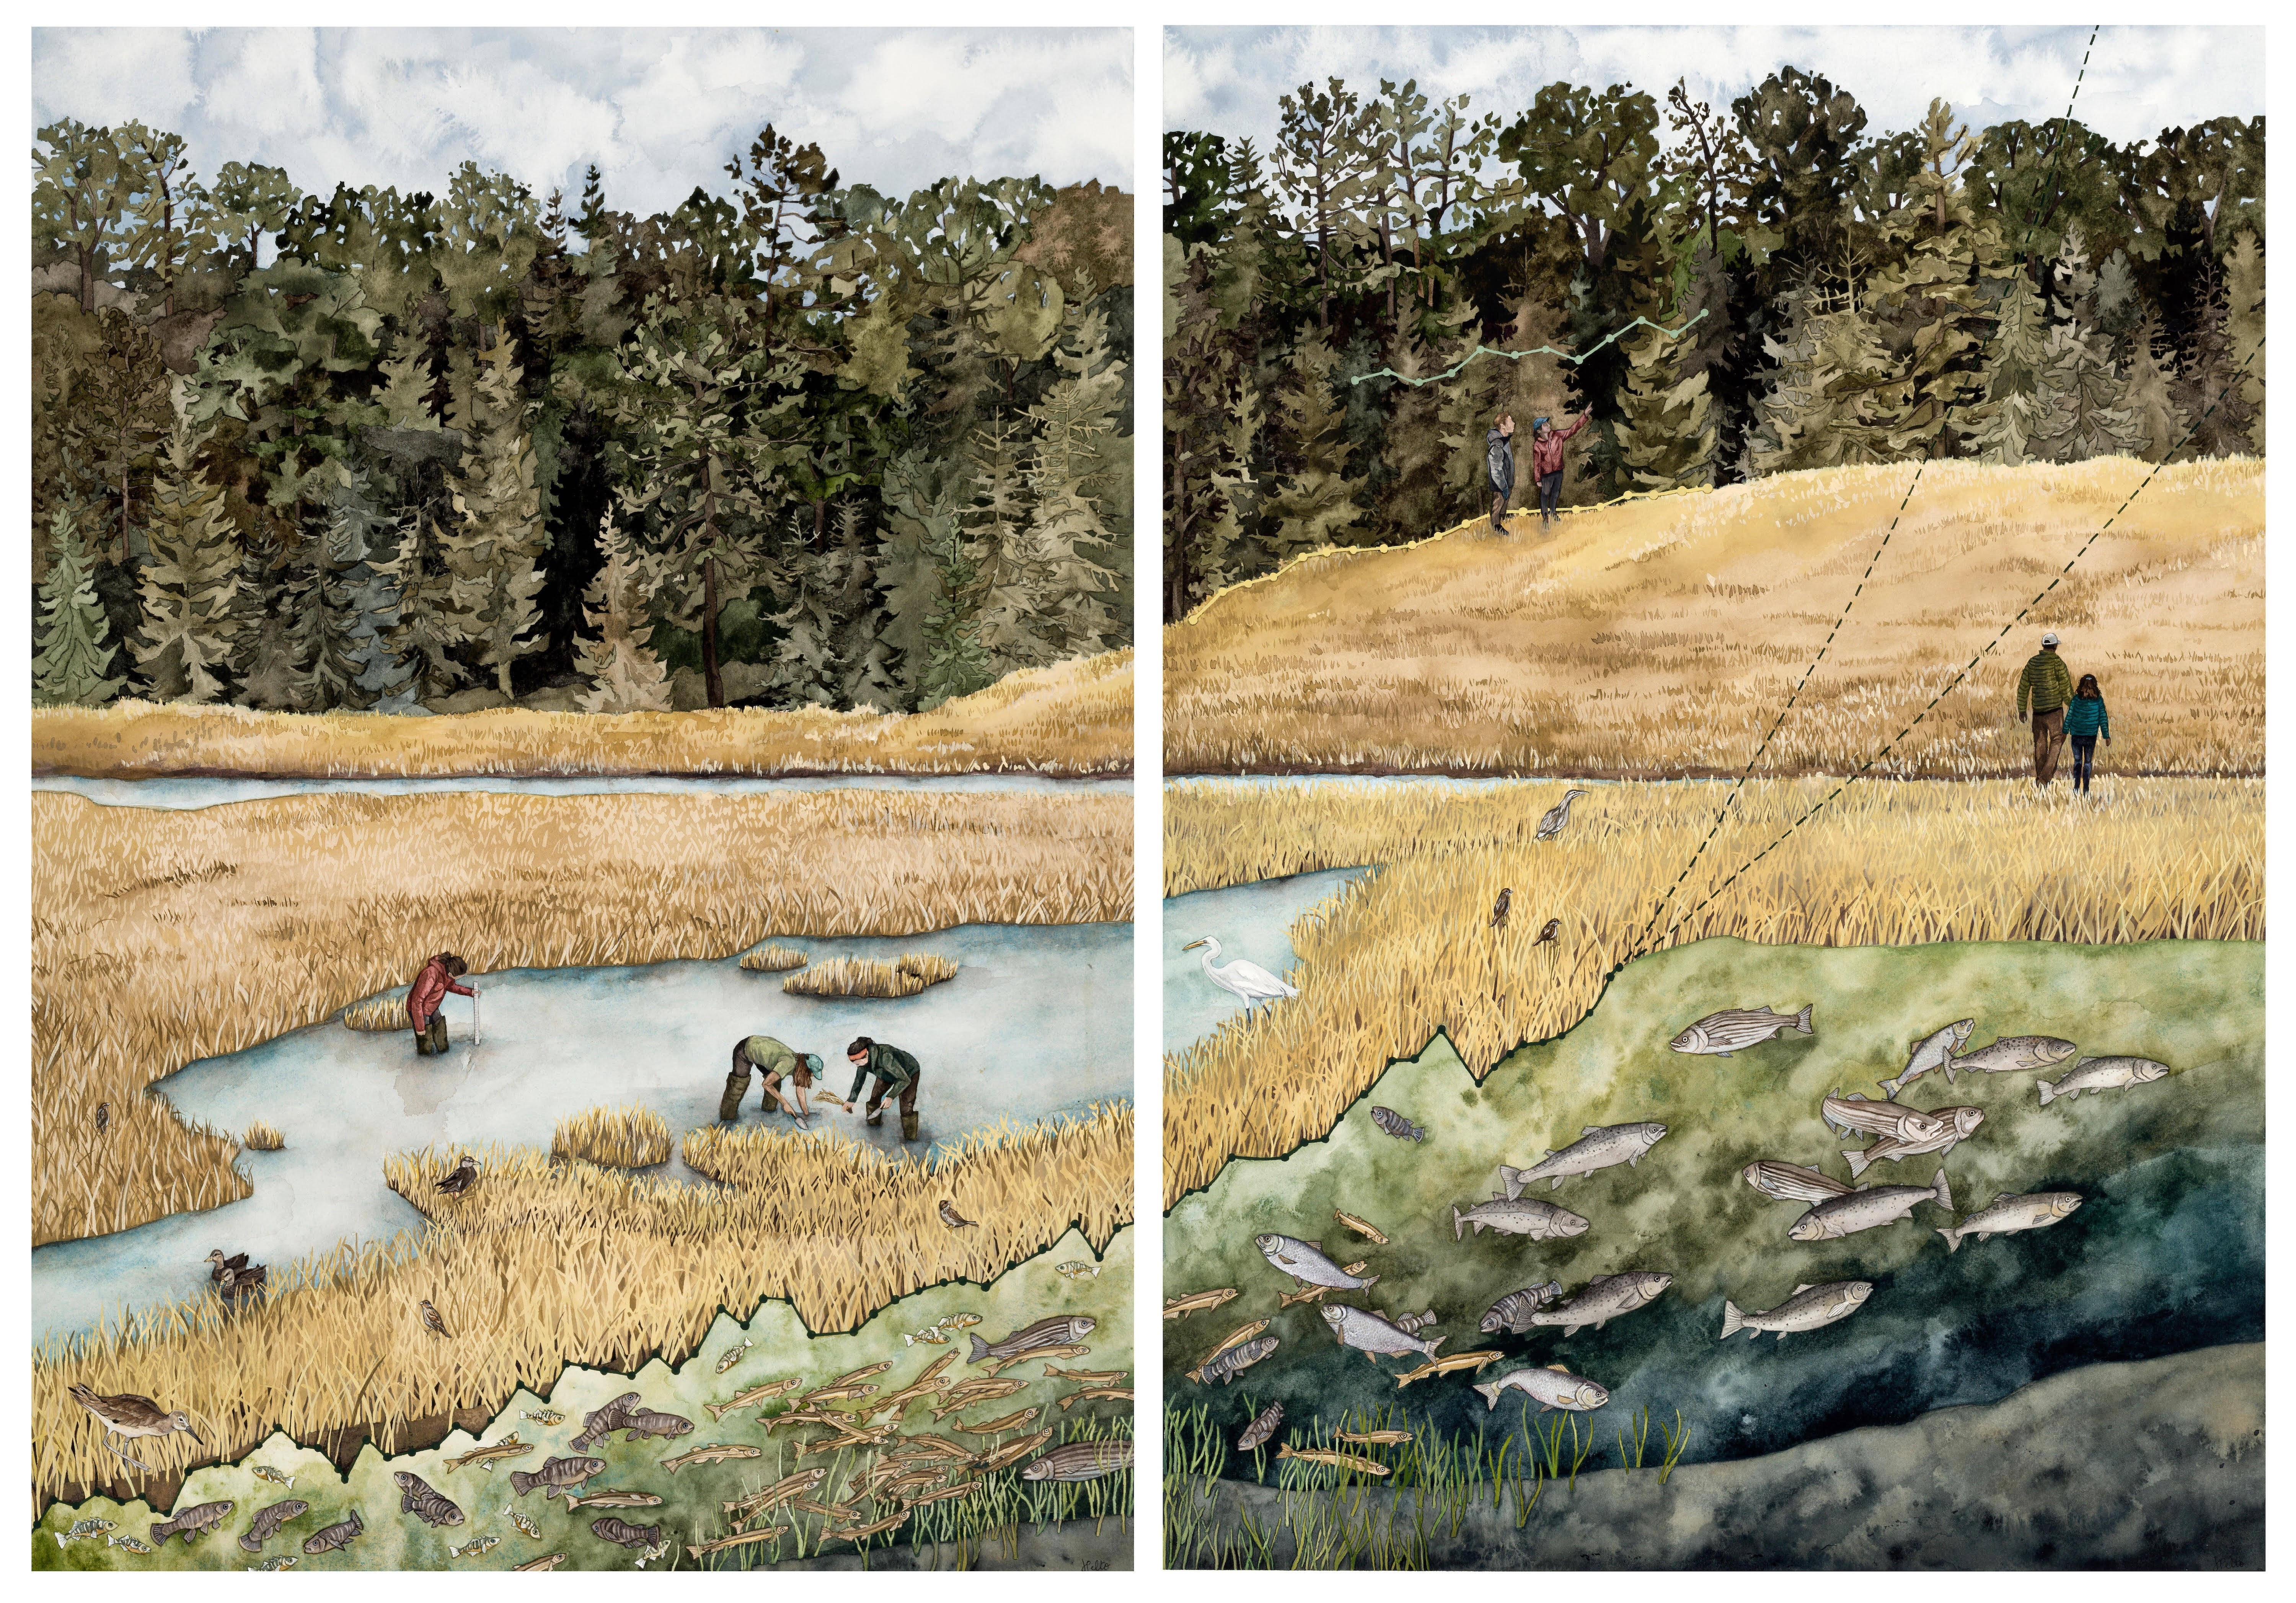 A vibrant landscape painting of people walking in a hay field, others standing on a hill with pine trees in the background, a stream with many fish swimming in it, birds and people in a pond planting hay and measuring water depth and birds all around.